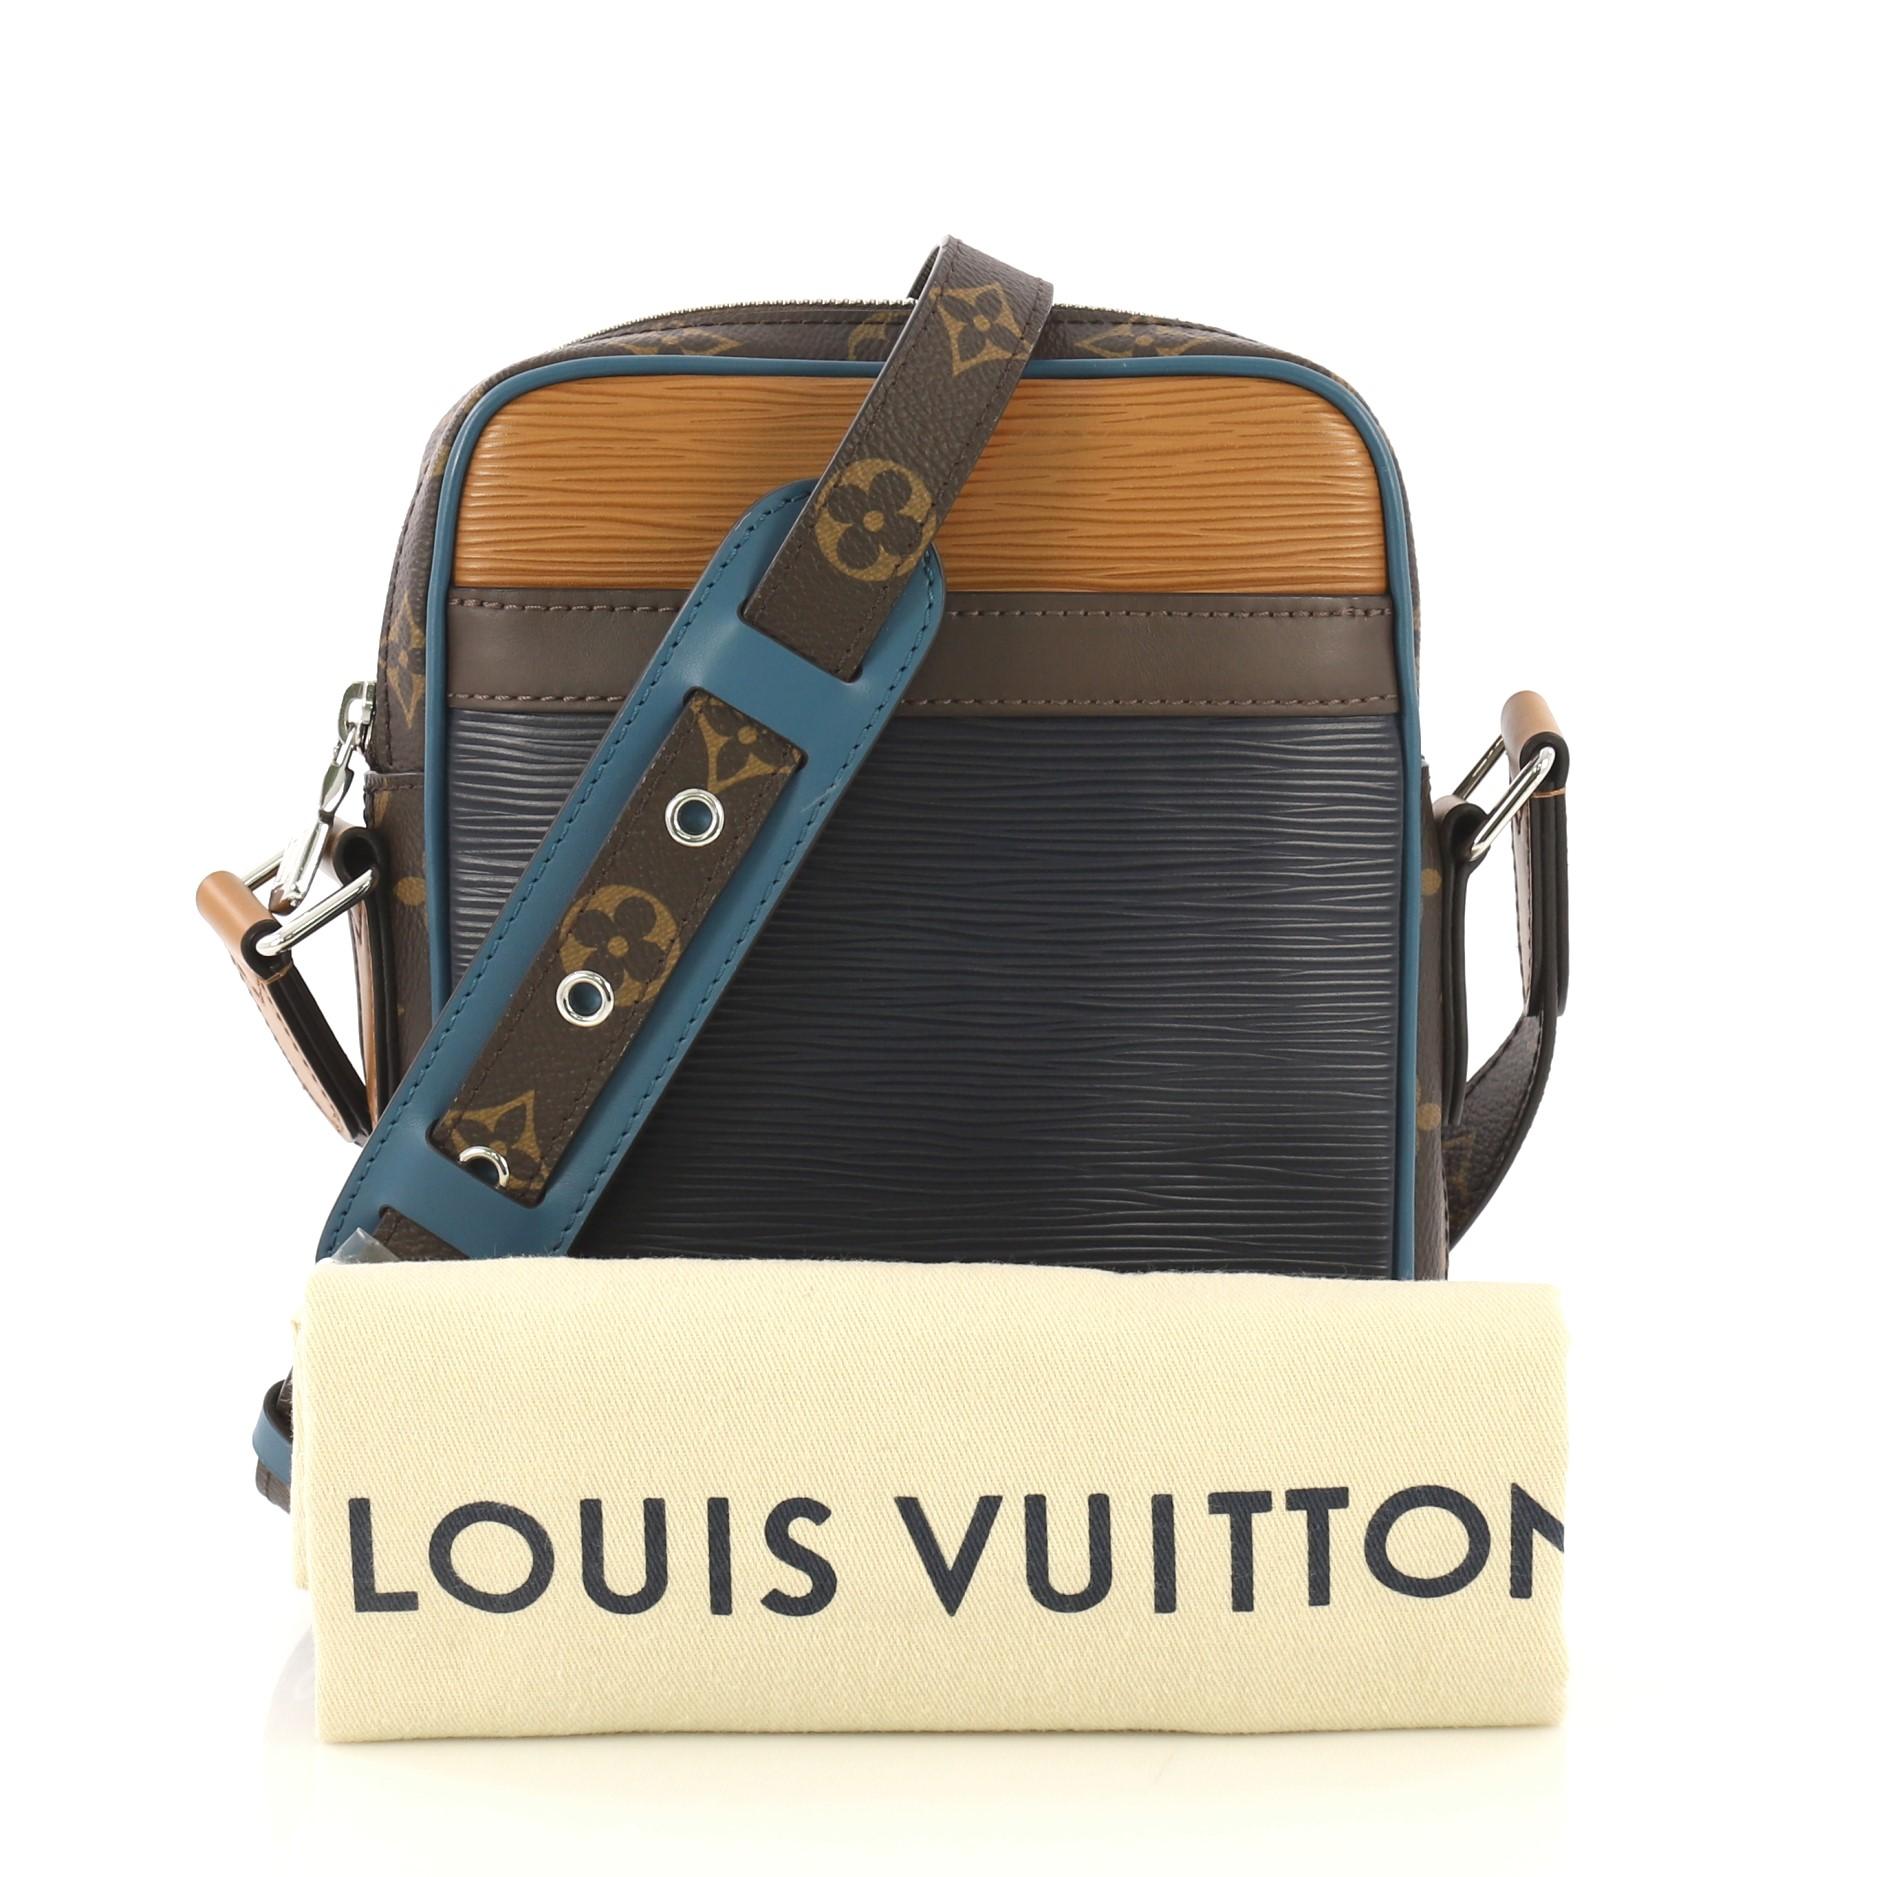 This Louis Vuitton Danube Handbag Epi Leather with Monogram Canvas Slim, crafted from brown and blue leather with monogram coated canvas, features an adjustable strap, exterior slip pocket, and silver-tone hardware. Its zip closure opens to a brown